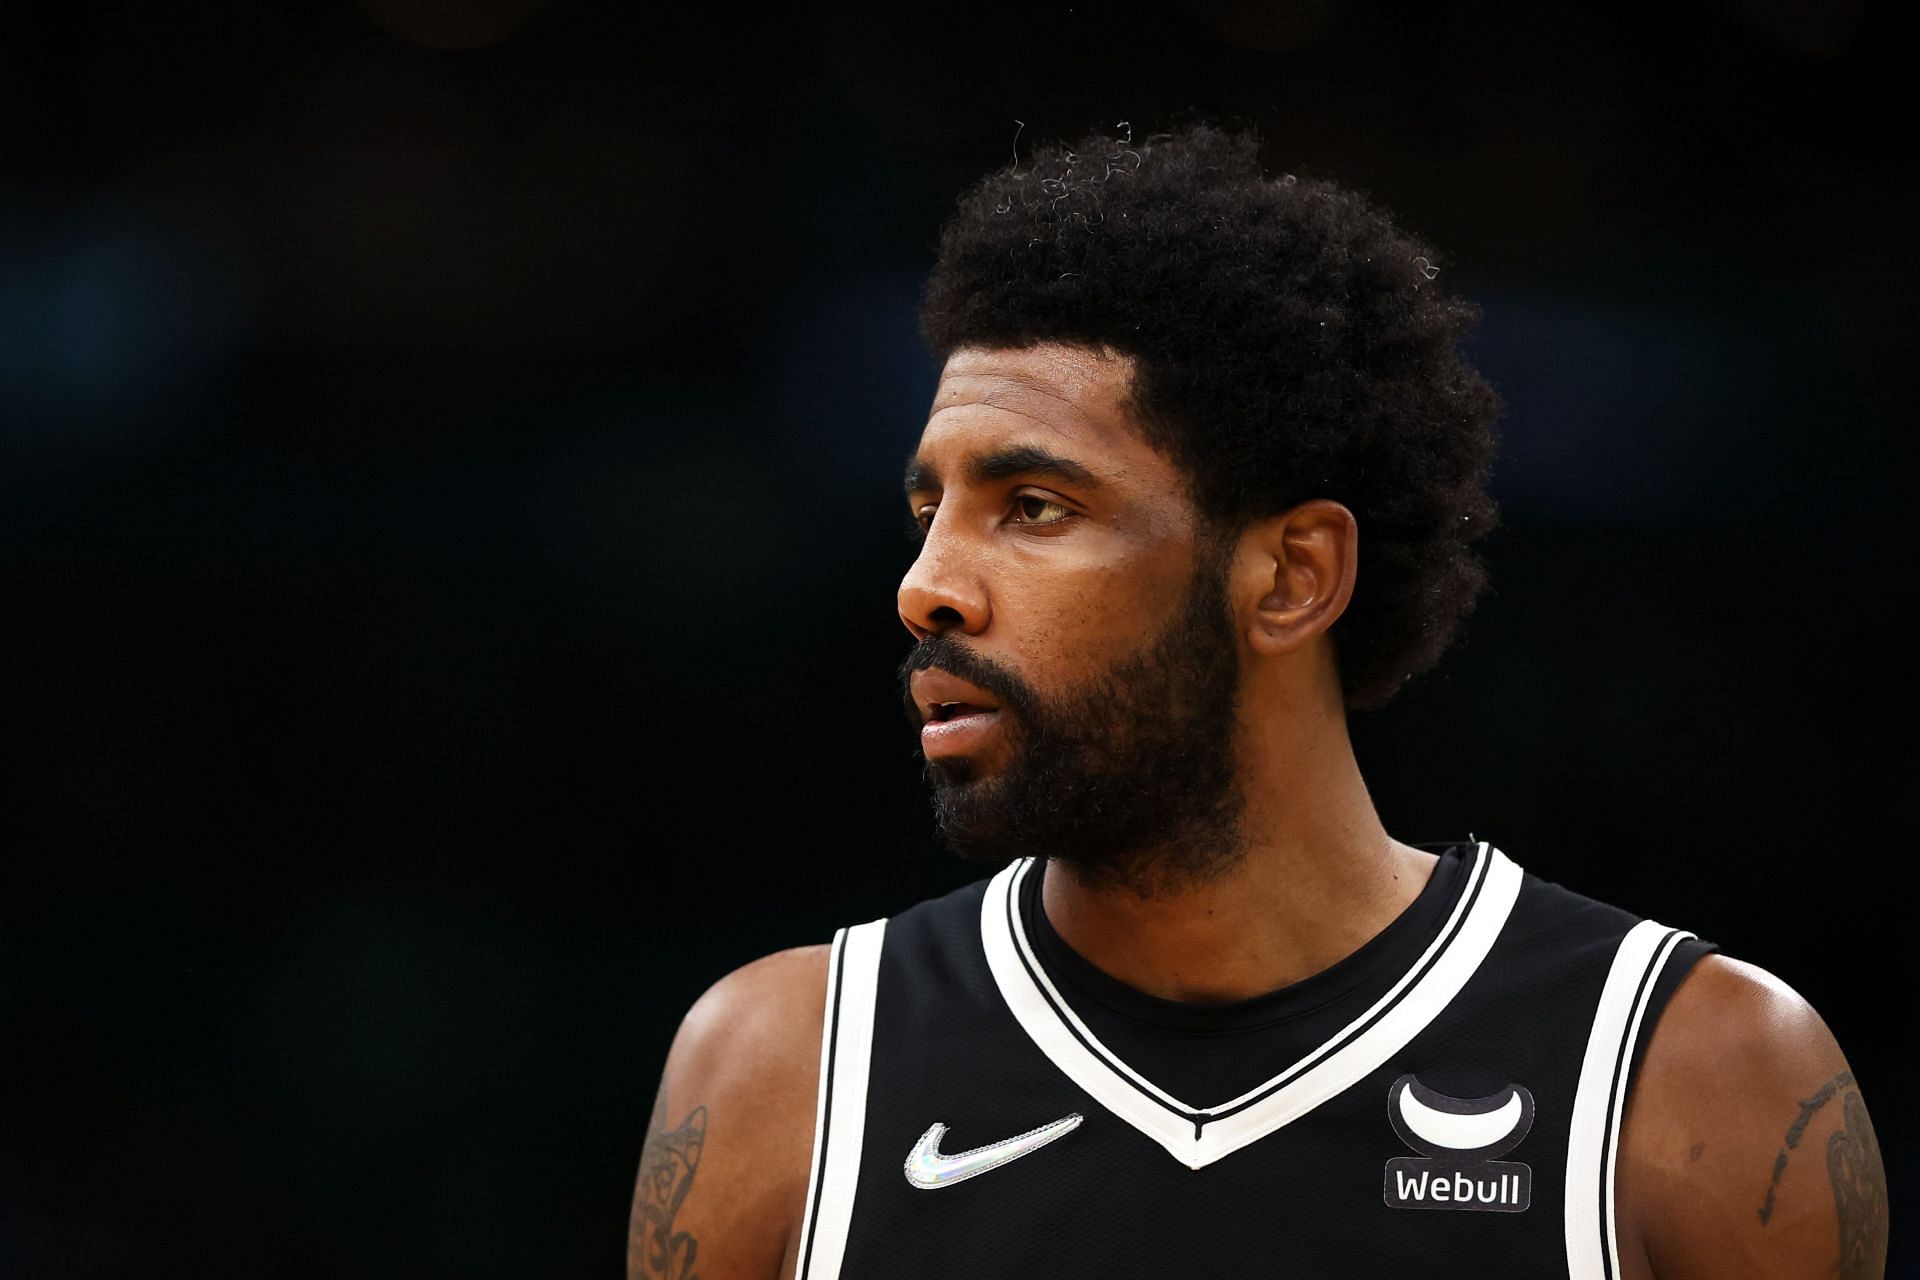 Brooklyn Nets superstar Kyrie Irving is not vaccinated